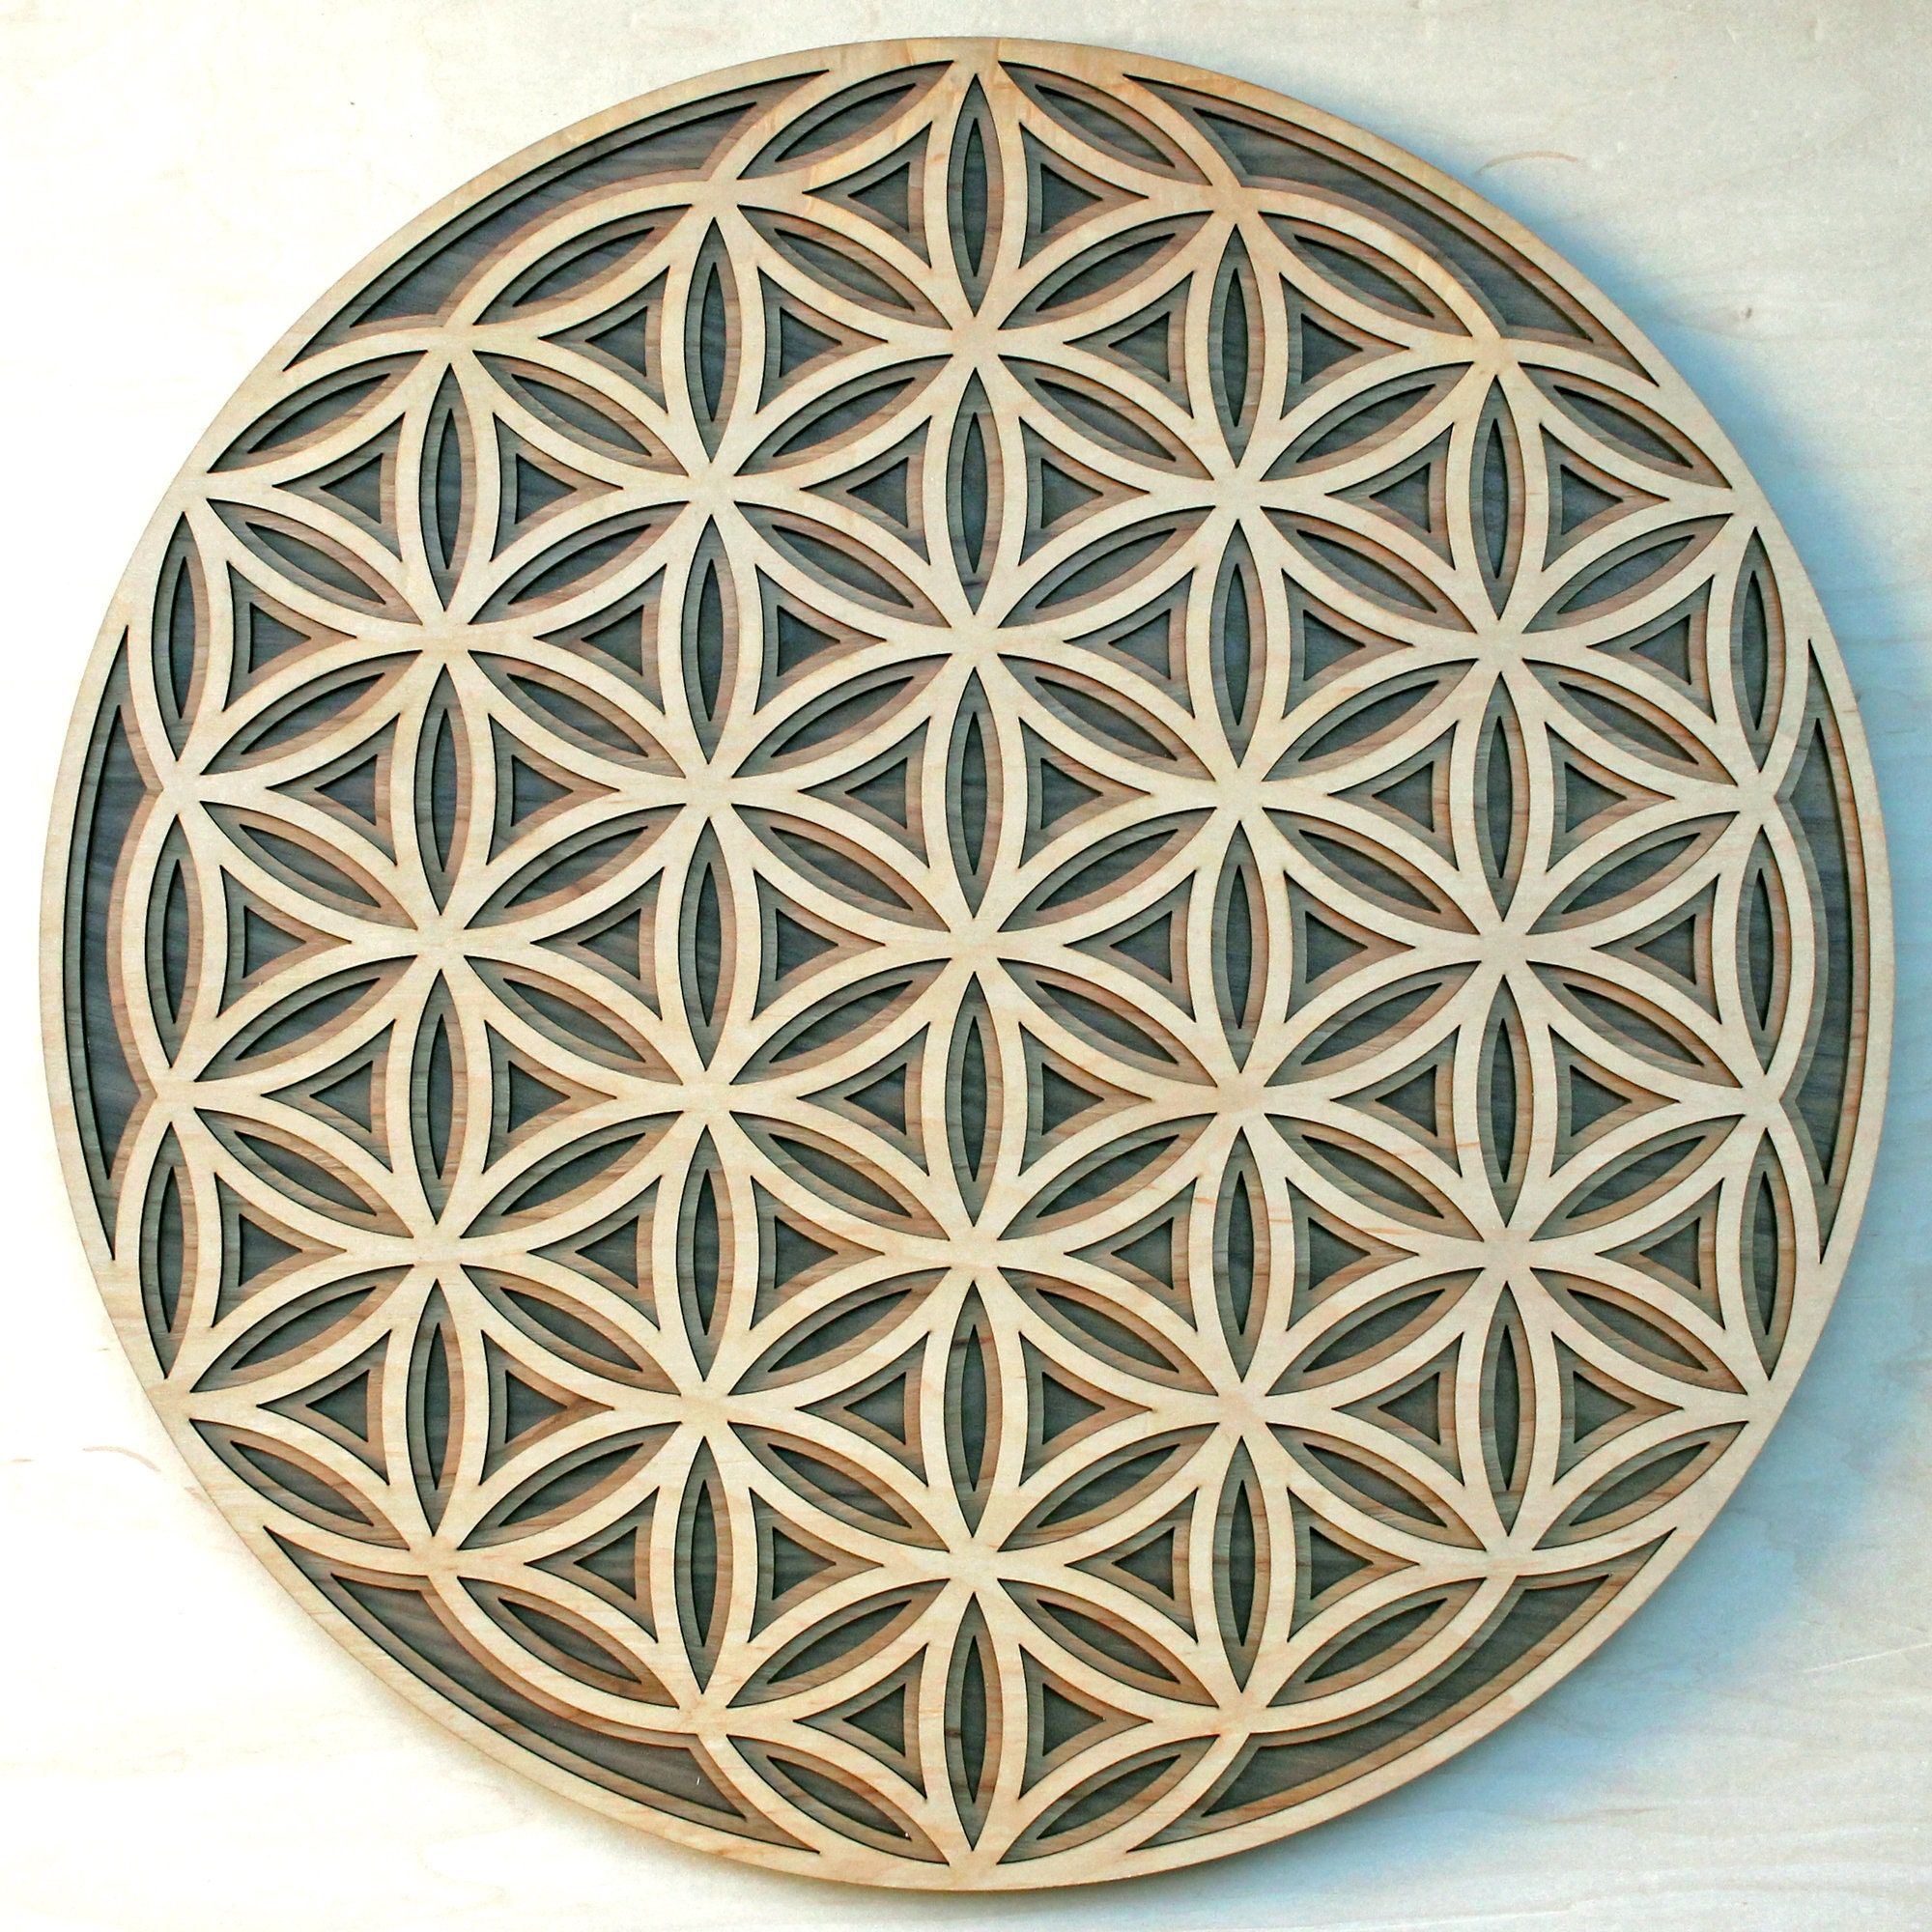 Flower Of Life 3 Layer 18 22 Wood Wall Art Laser Cut – Etsy With Regard To Newest 3 Layers Wall Sculptures (View 8 of 20)